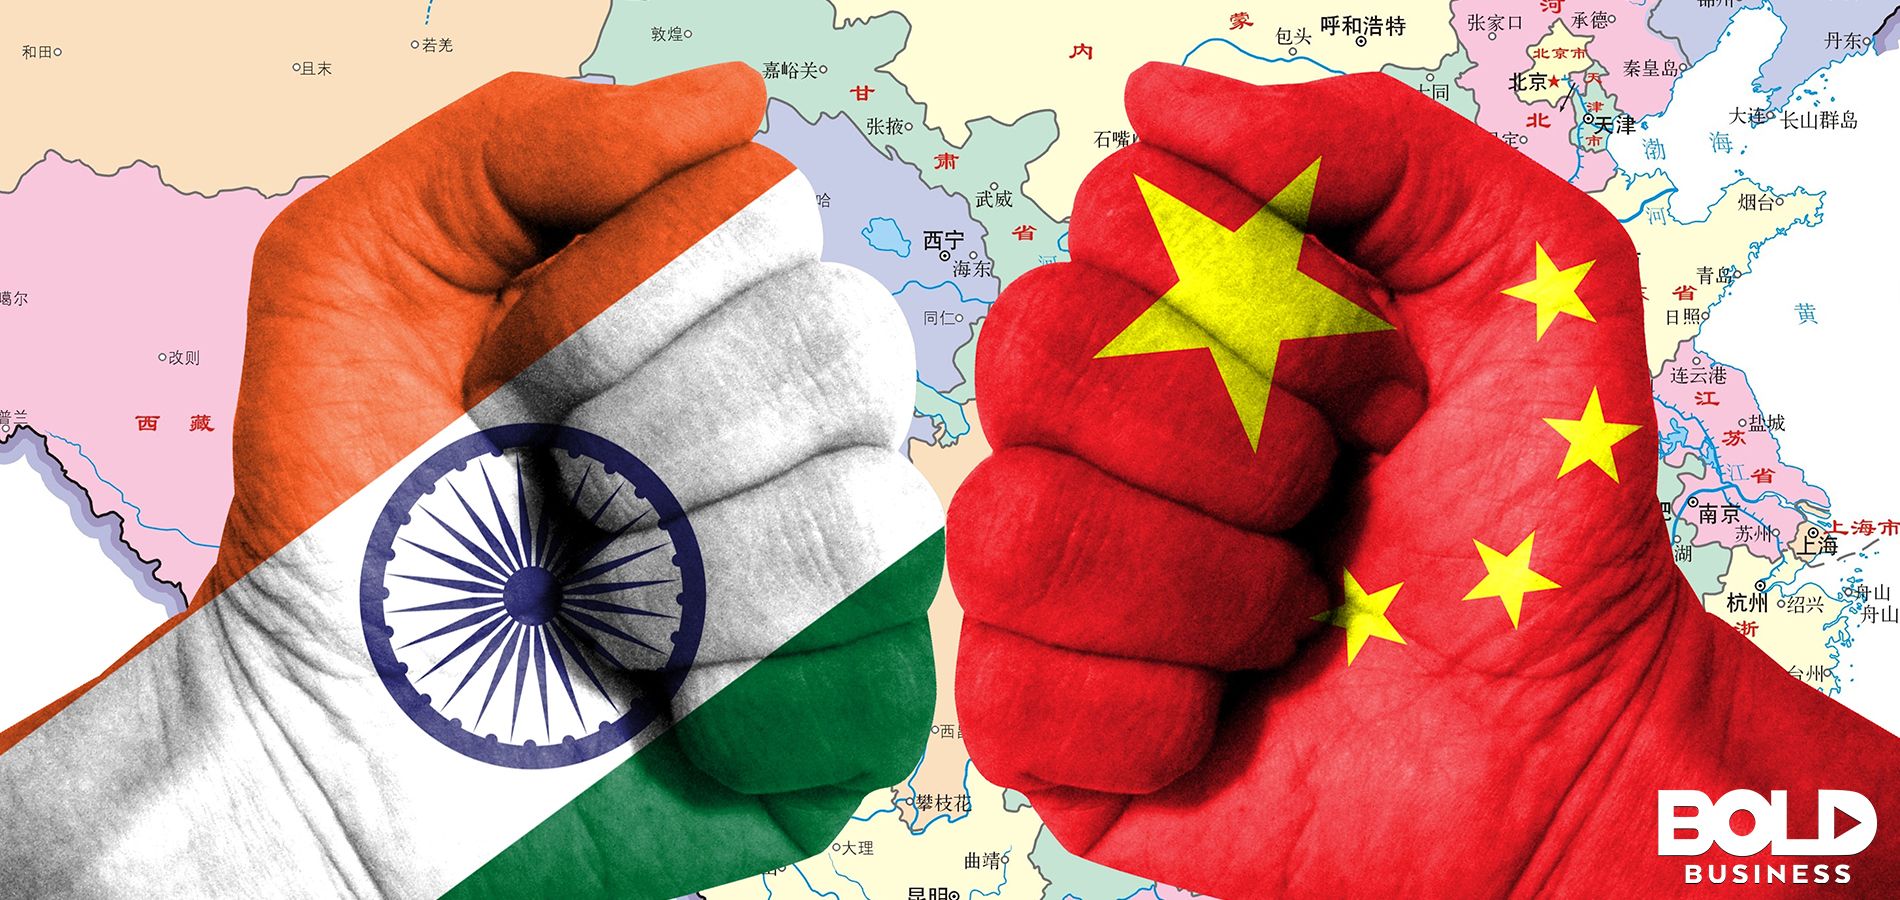 two fists showing India’s future economic growth